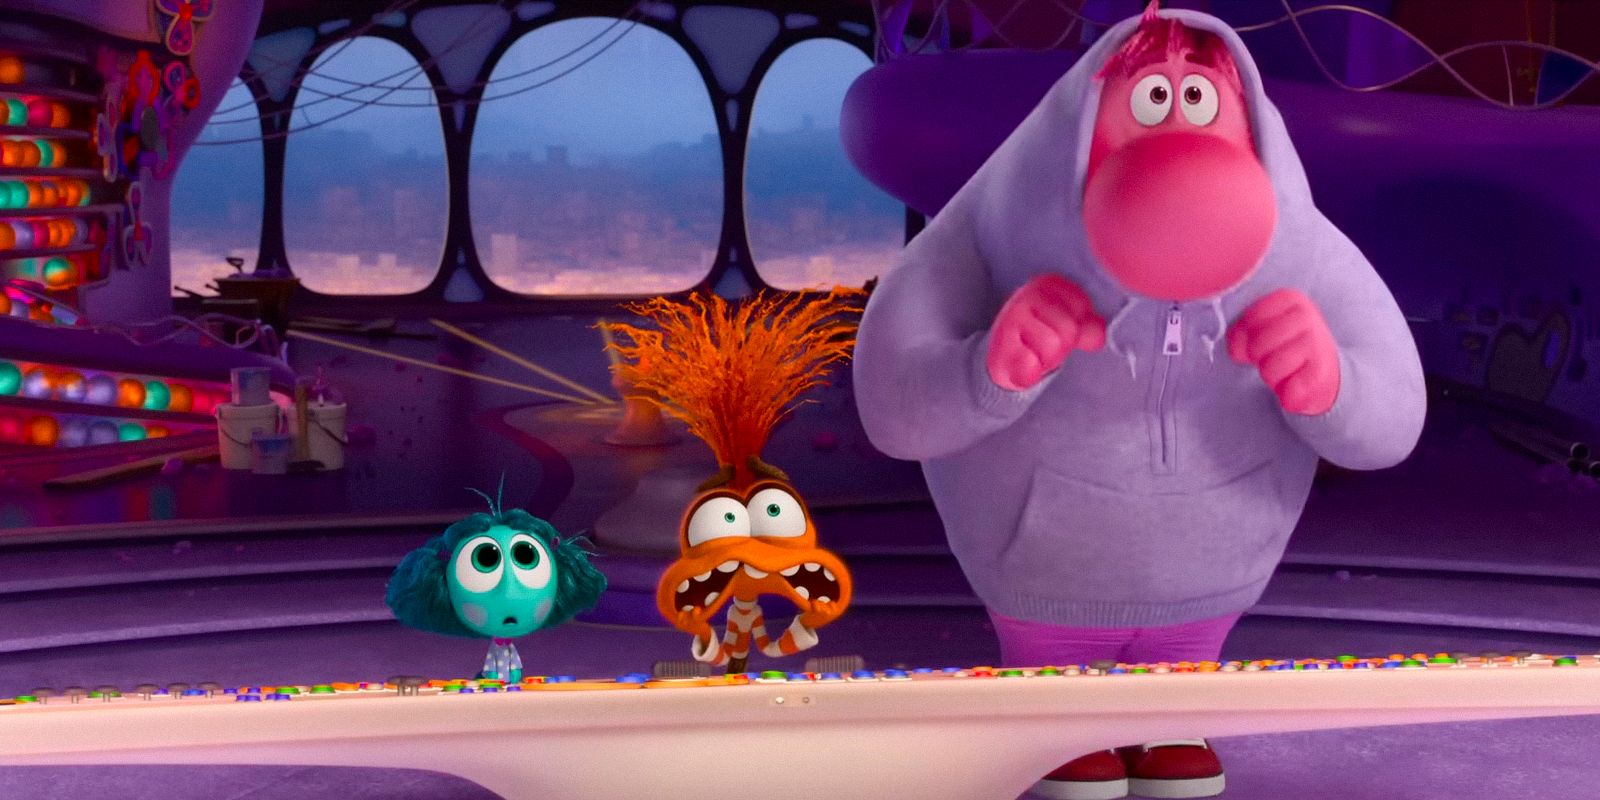 Envy, Anxiety, and Embarrassment in the headquarters in charge of the control panel in Inside Out 2